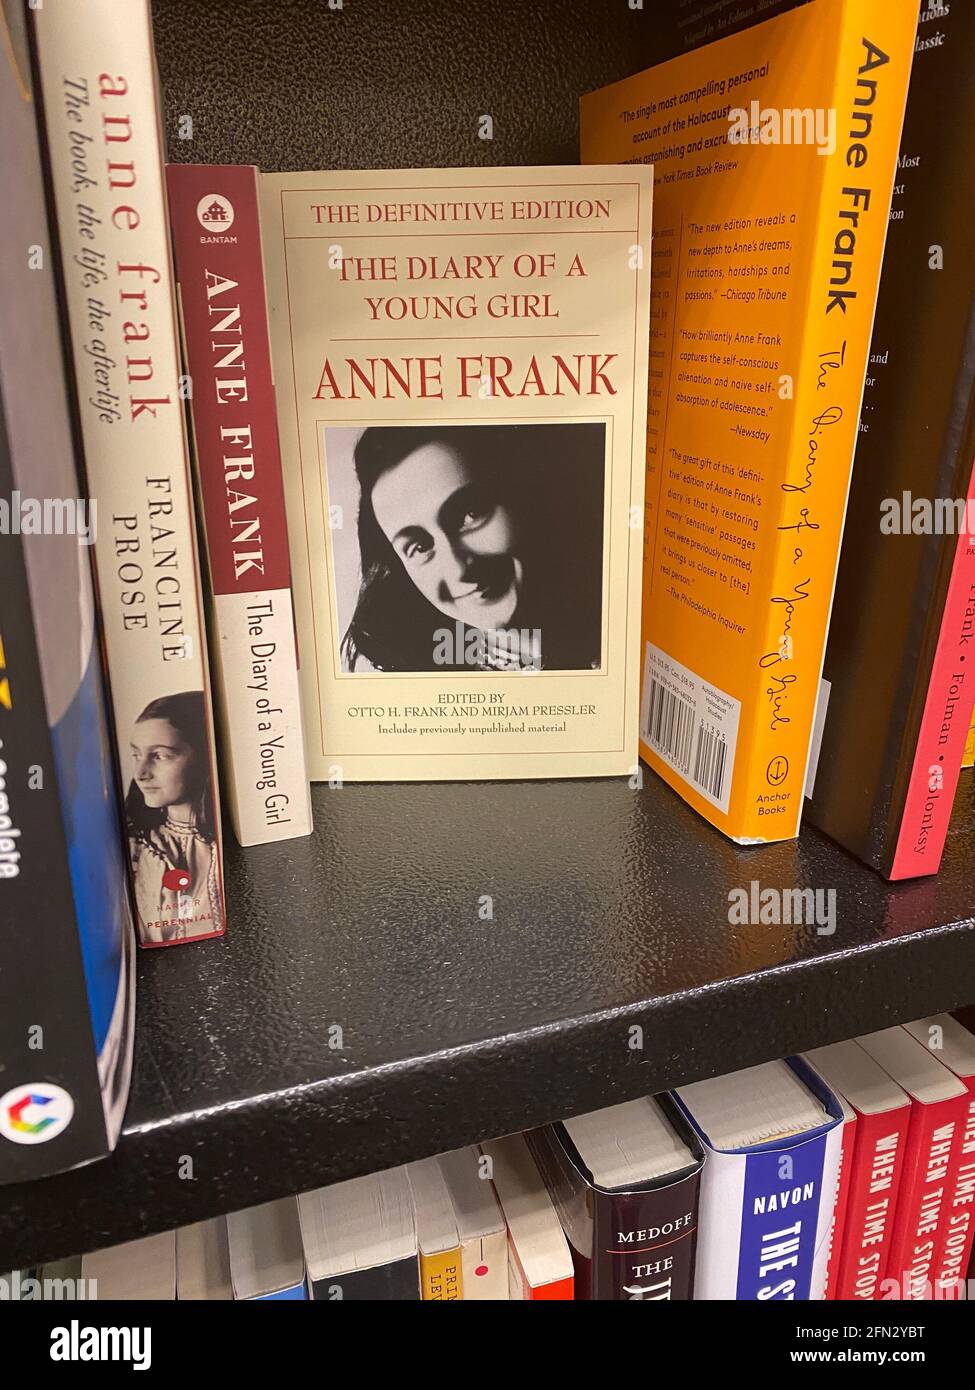 The Diary of Anne Frank and books about her life are still popular sellers at book stores.  New York City. Stock Photo